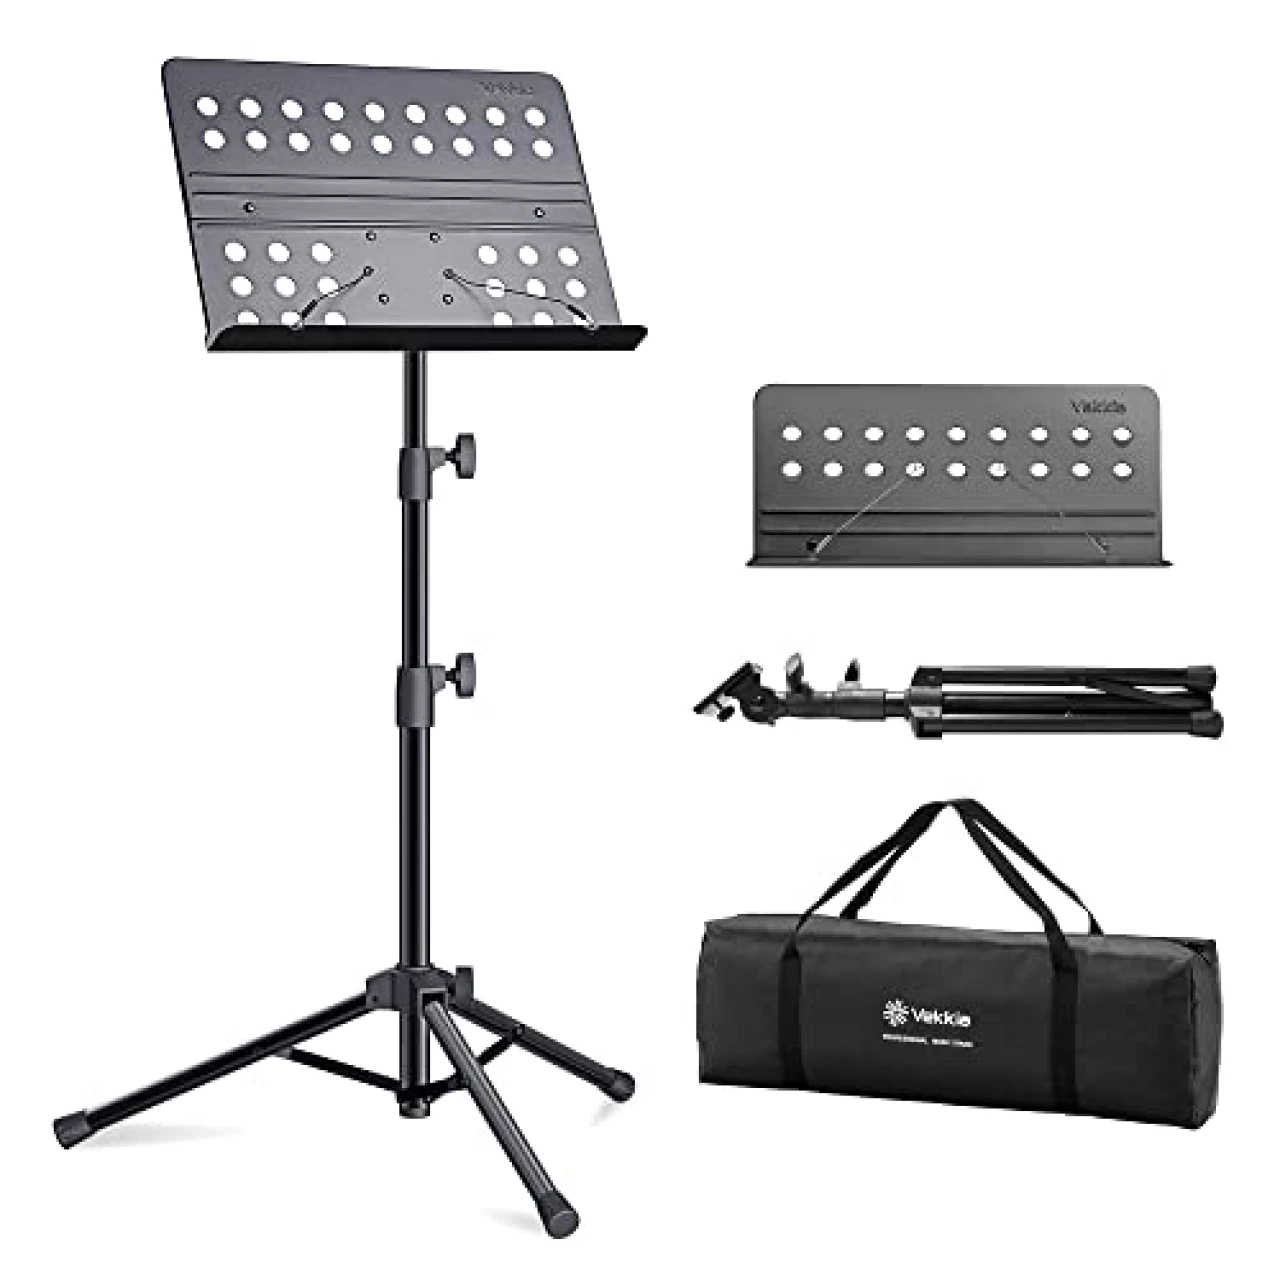 Vekkia Sheet Music Stand-Metal Professional Portable Perforated Music Stand with Carrying Bag, Folding Adjustable Music Holder, Super Sturdy suitable for Instrumental Performance &amp; Band &amp; Travel